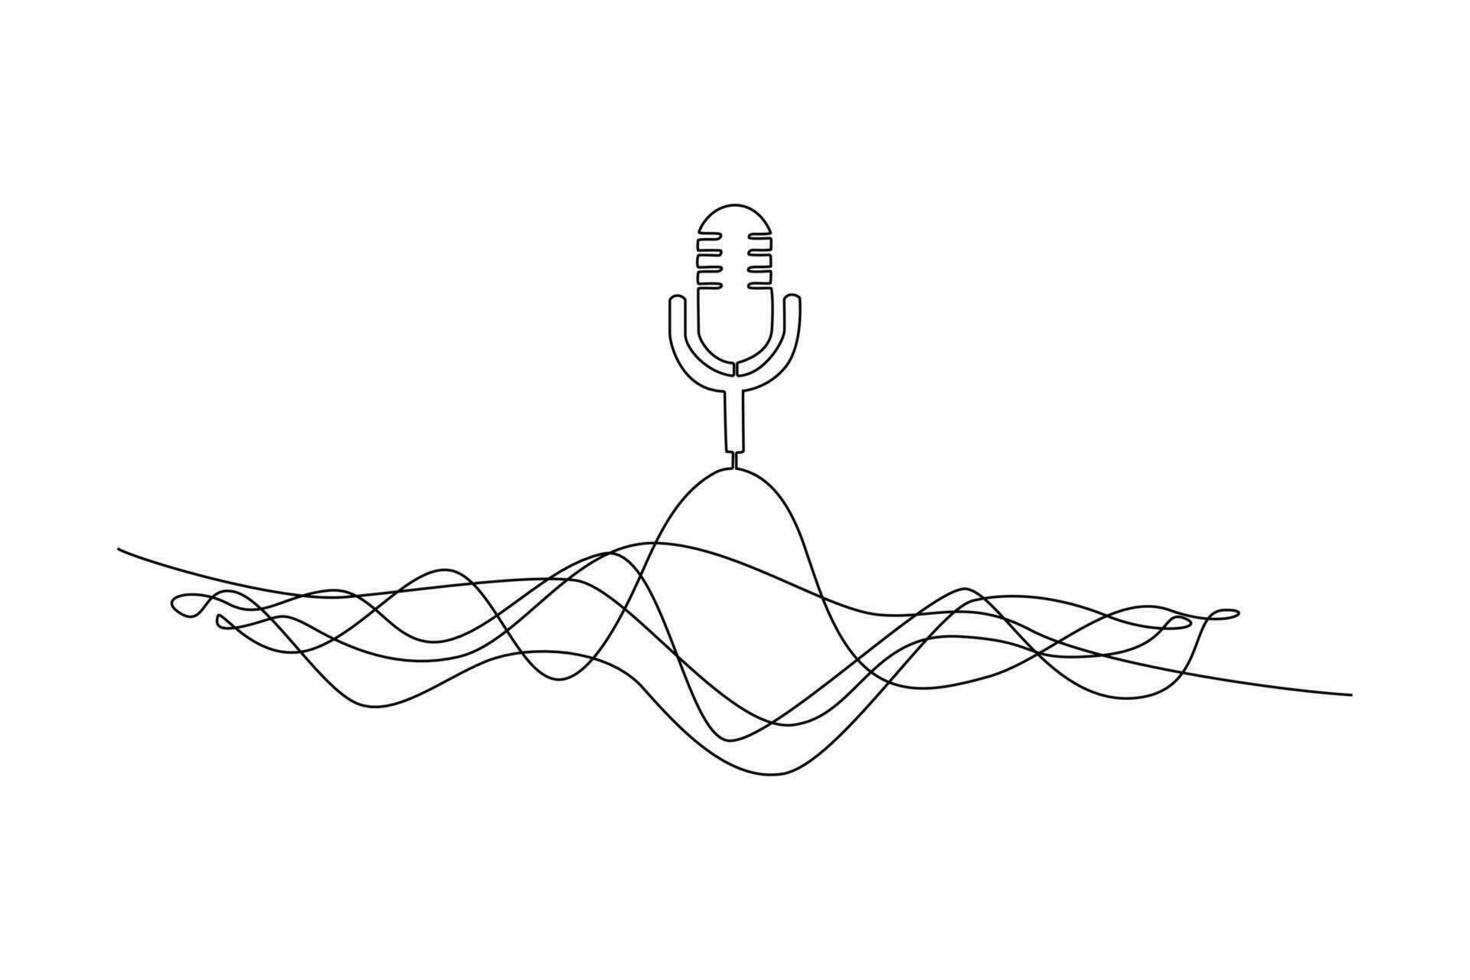 Single one line drawing Speech recognition device concept. Voiceover. Continuous line draw design graphic vector illustration.